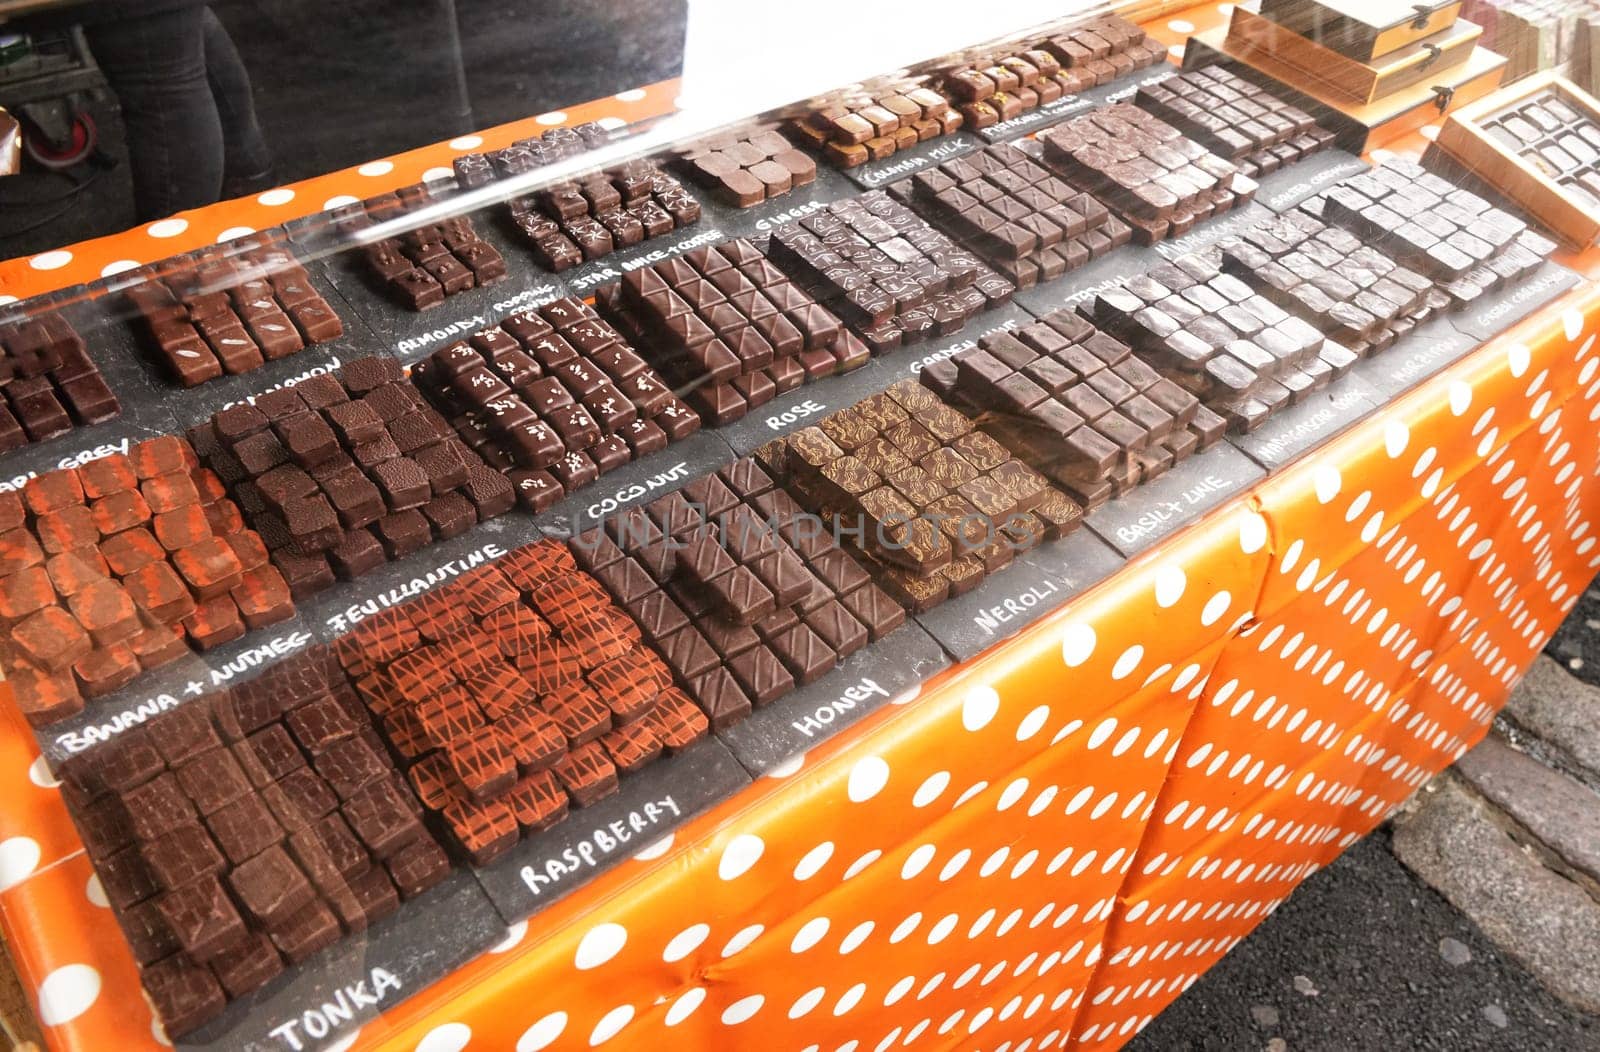 Selection of artisan chocolates variety displayed at stall in Borough Market, London by Ivanko